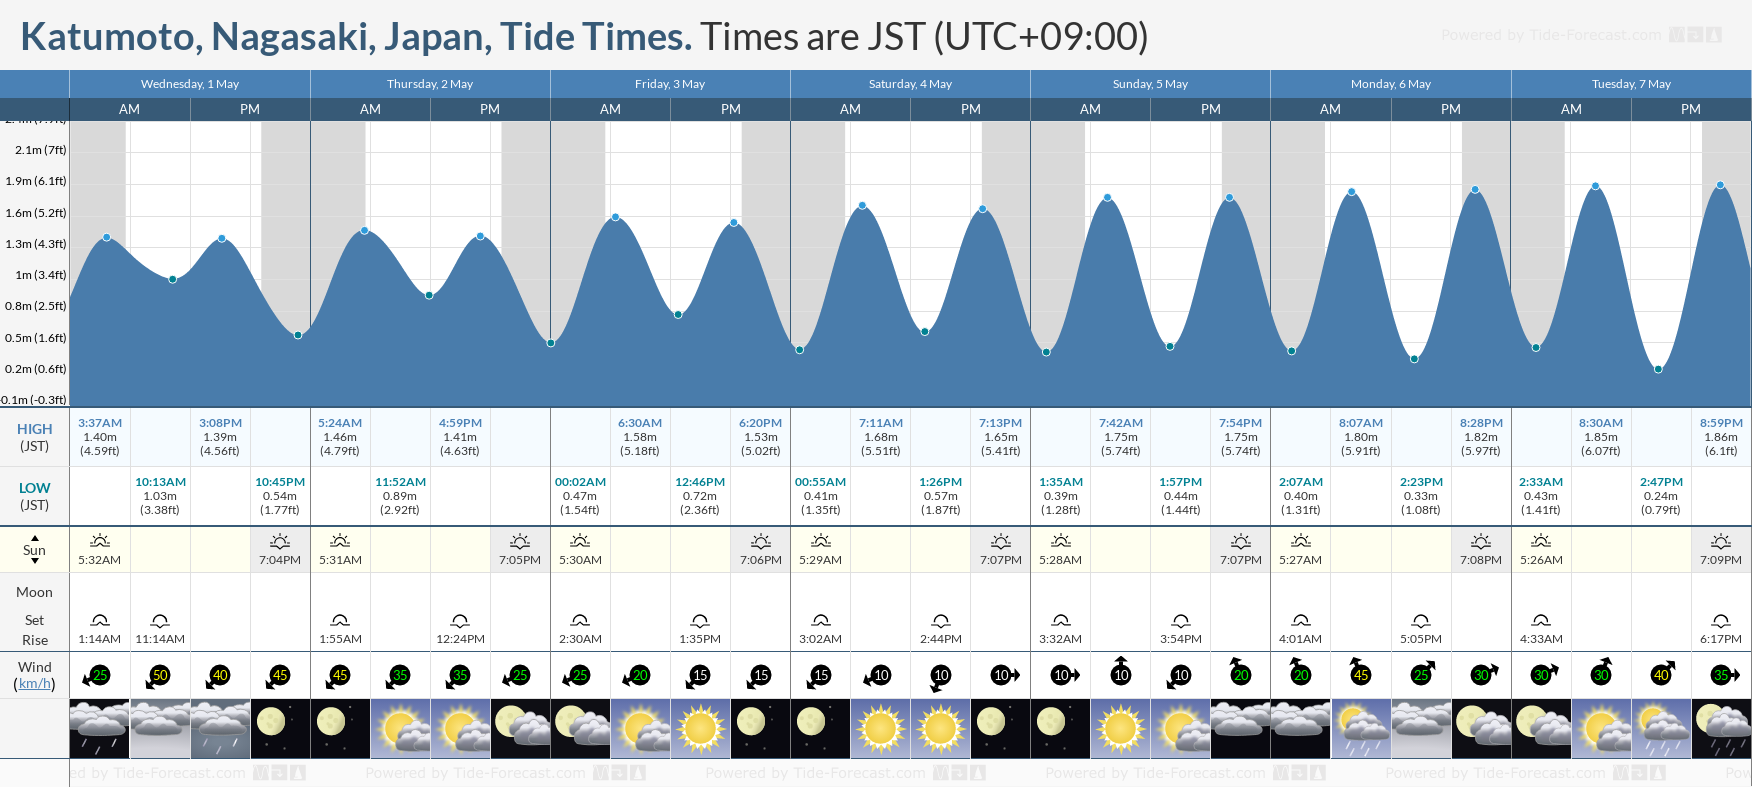 Katumoto, Nagasaki, Japan Tide Chart including high and low tide tide times for the next 7 days